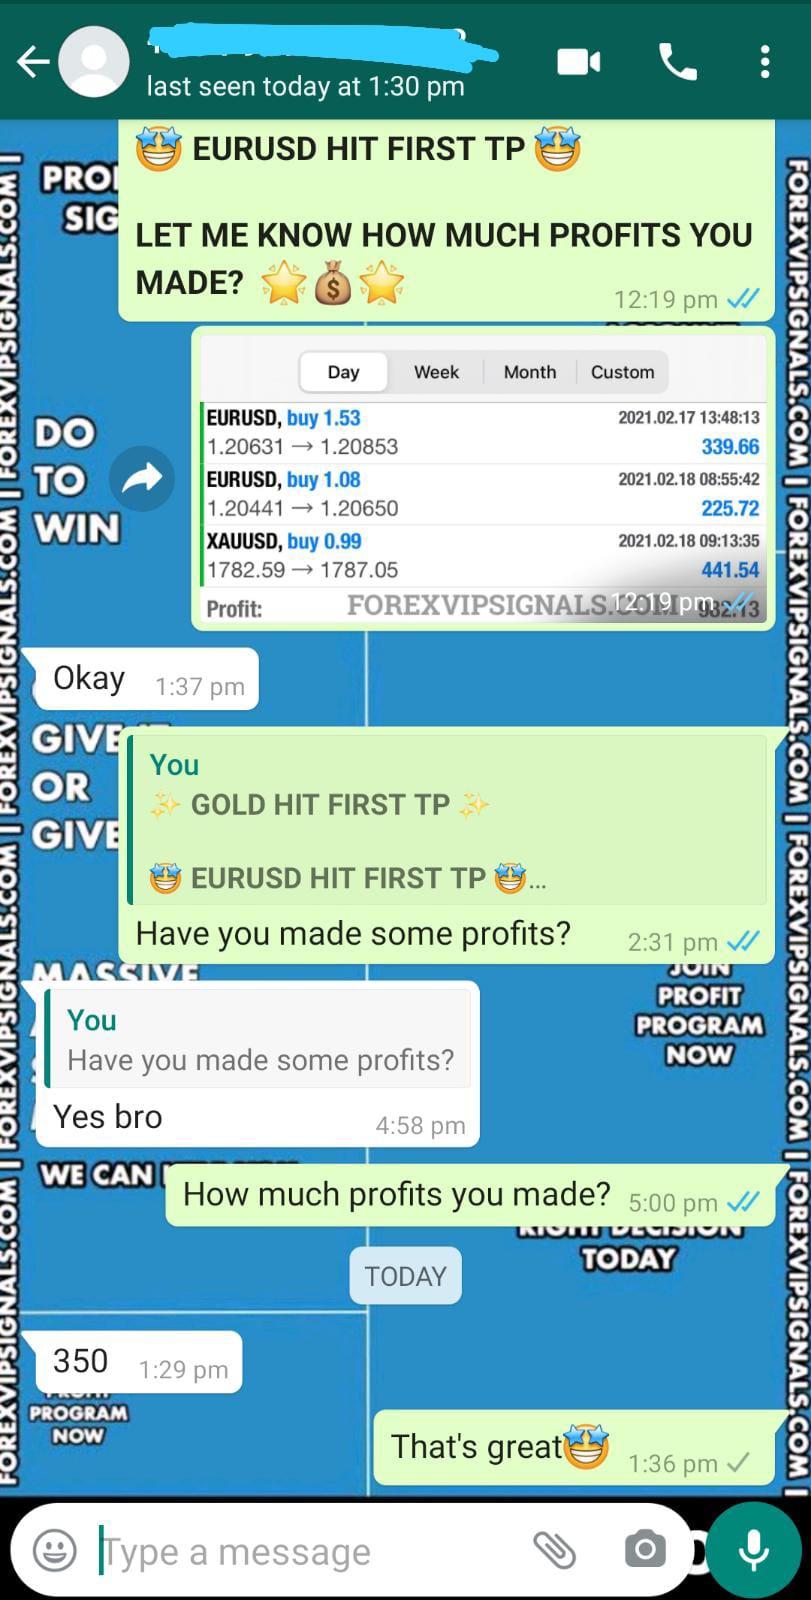 reliable forex signals with forex vip signals